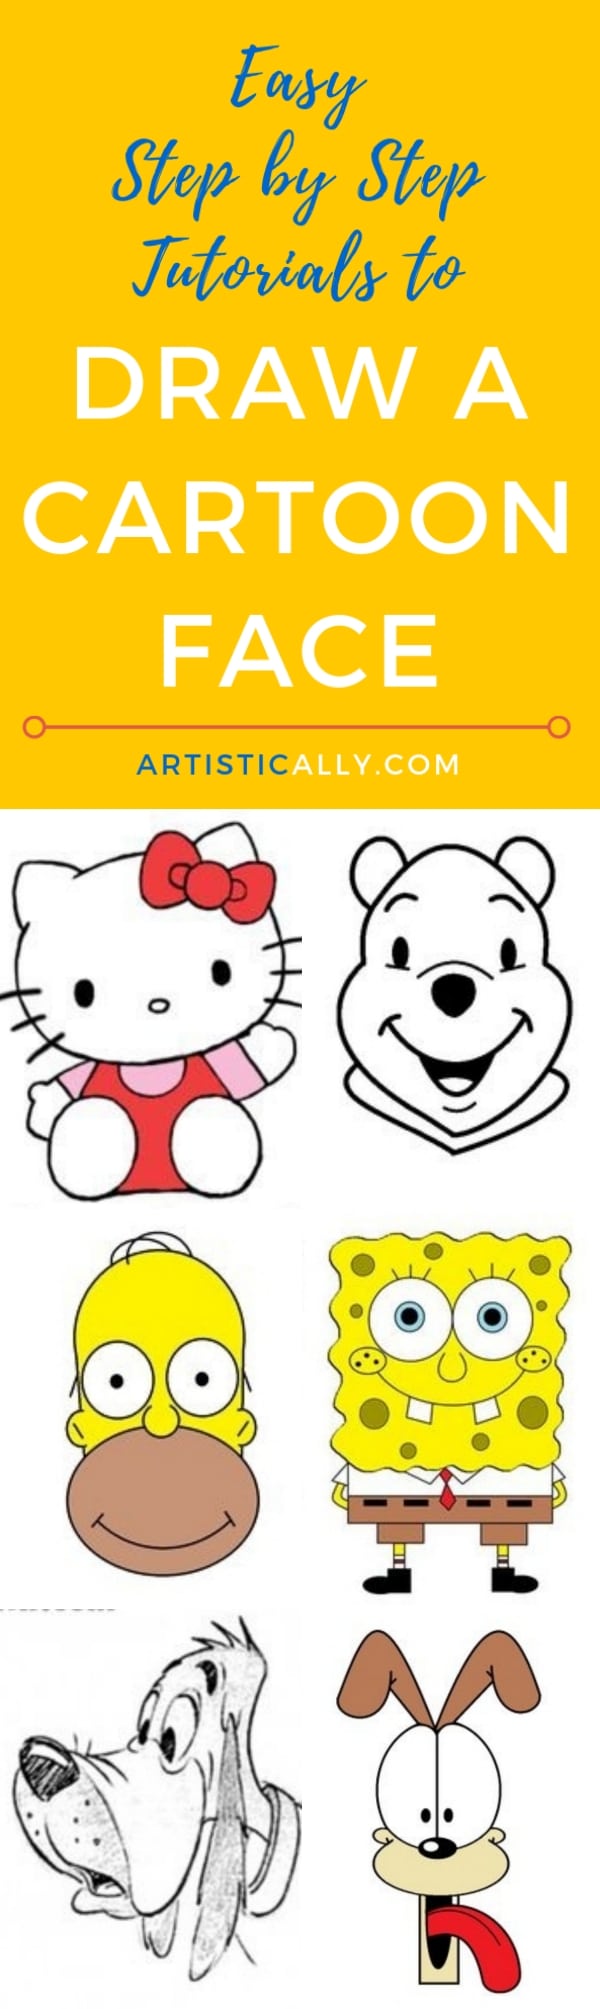 Easy Cartoon Drawing For Kids Step By Step - Food Affair